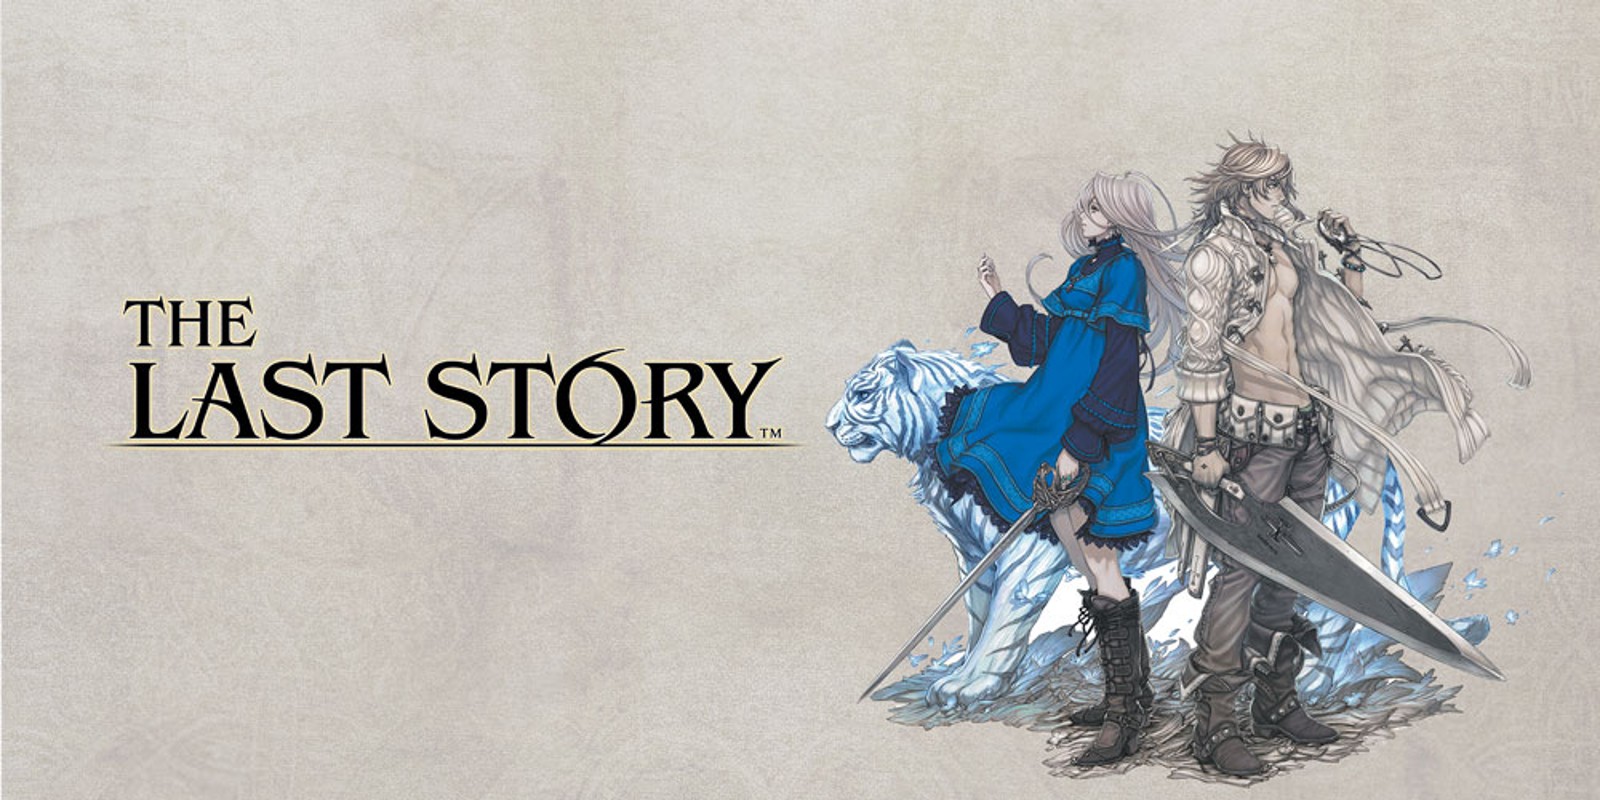 the last story wii games nintendo the last story wii games nintendo